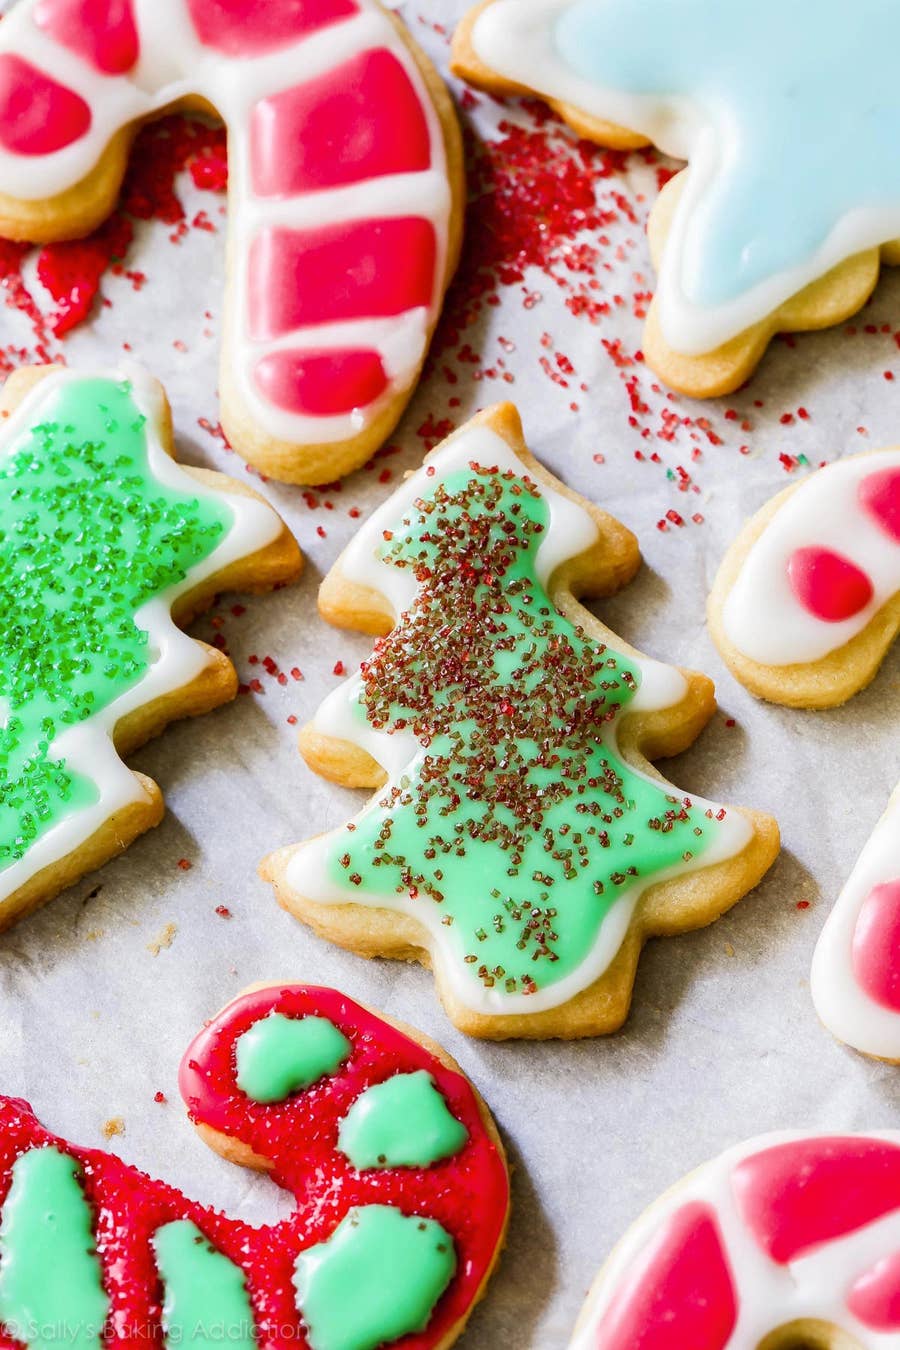 Christmas Sugar Cookies Recipe with Easy Icing - Sally's Baking